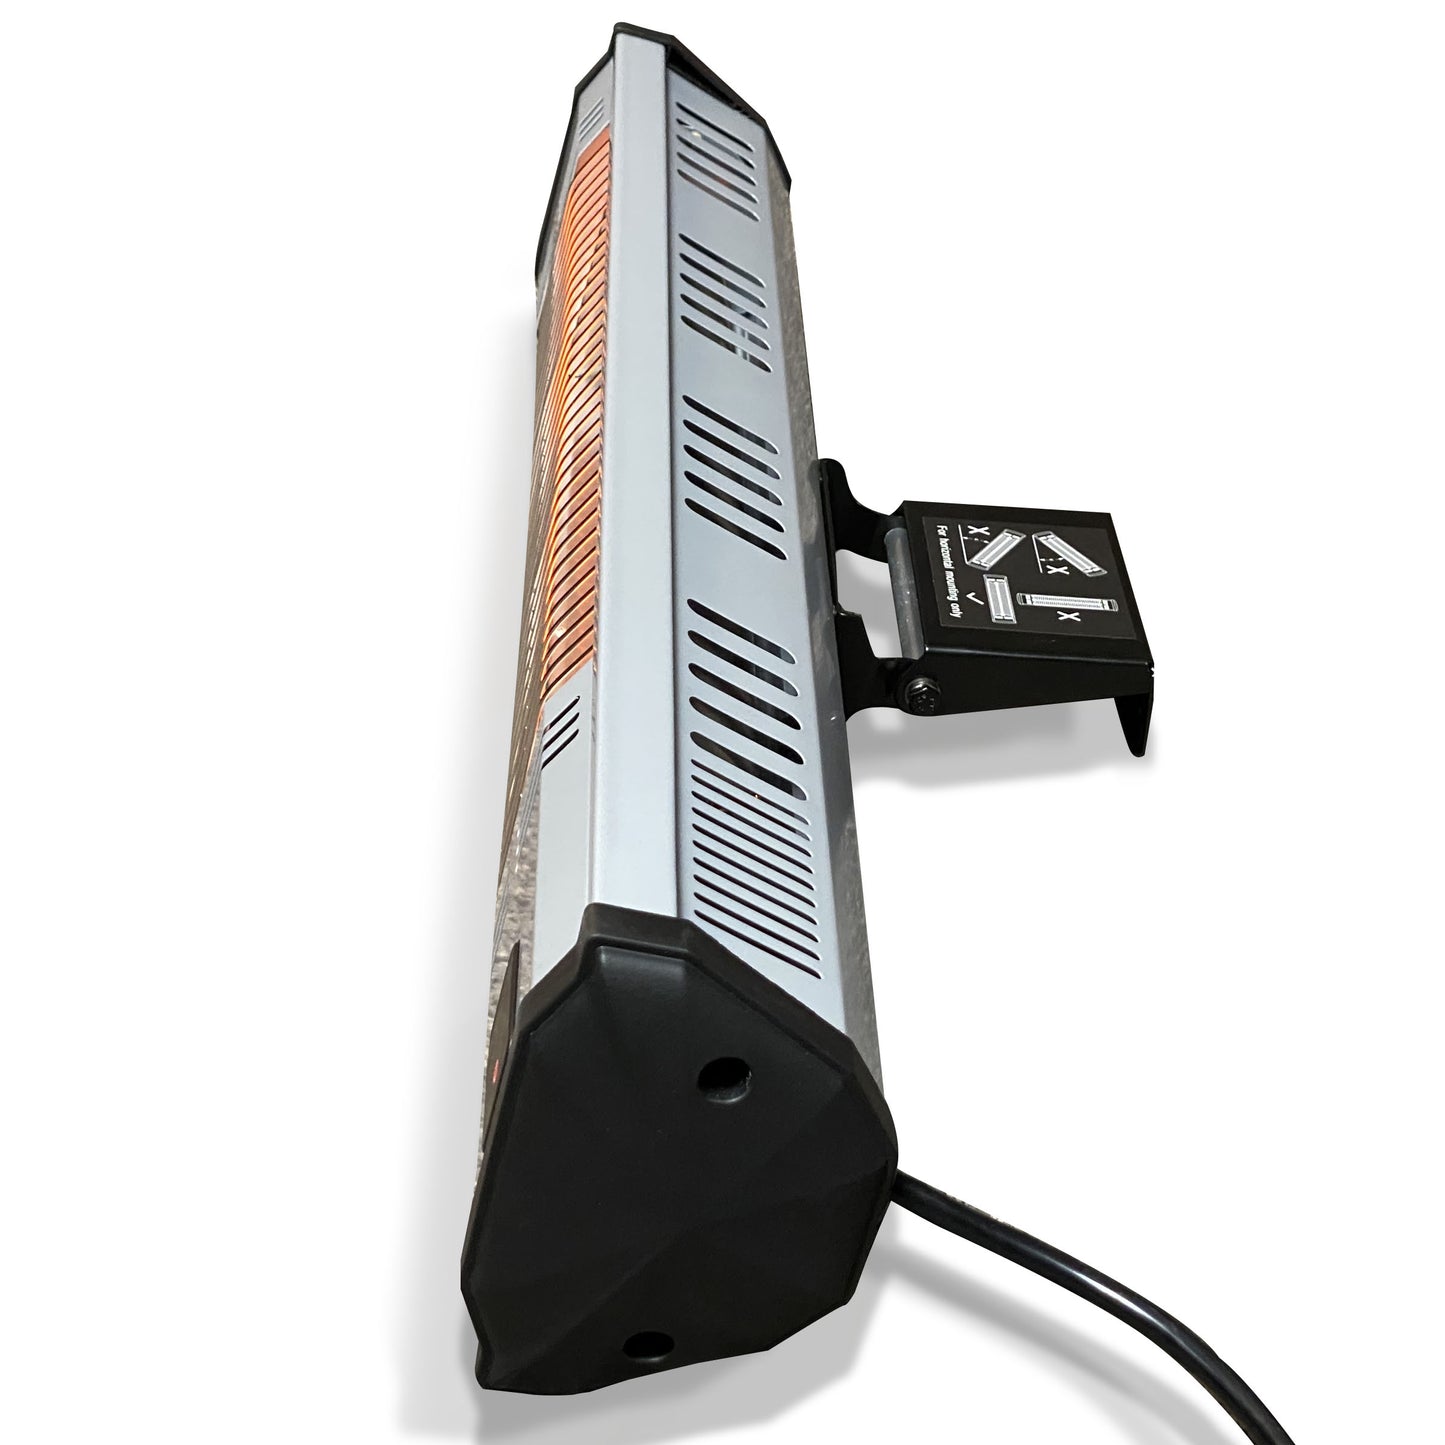 Tradesman 1,500-Watt Electric Outdoor Infrared Quartz Portable Space Heater with Wall/Ceiling Mount and Remote side view